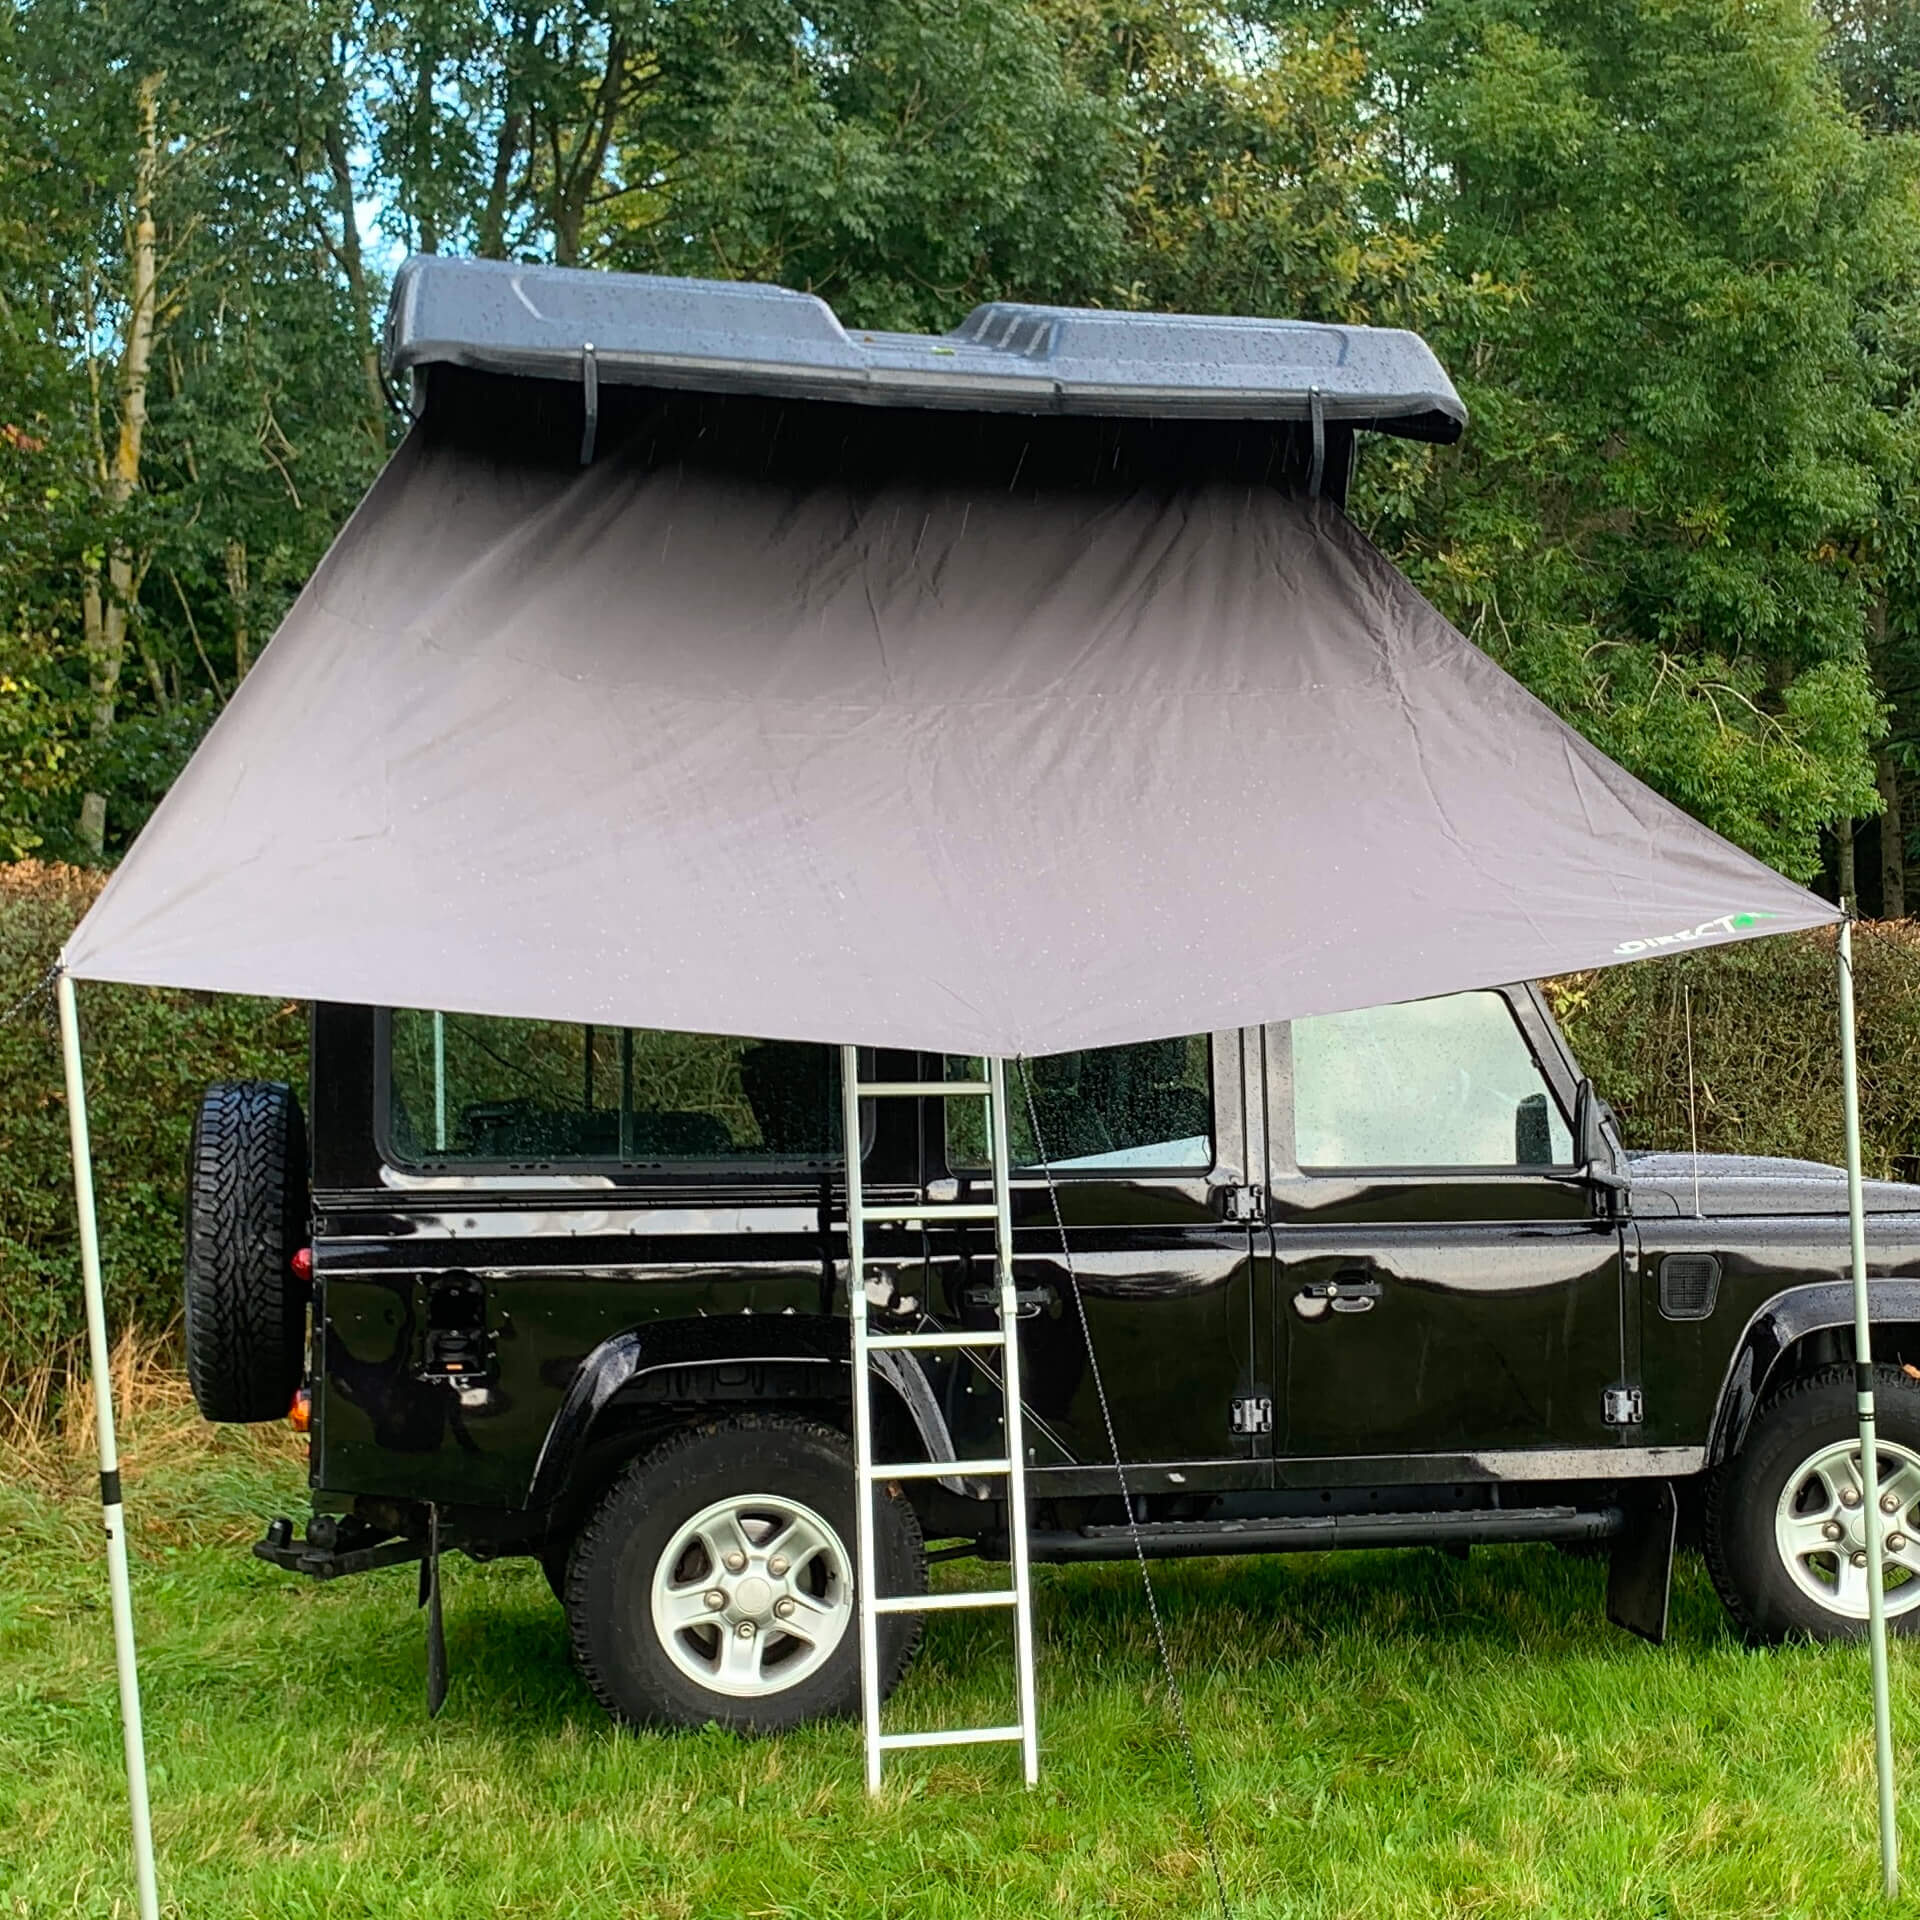 Forest Green Sun Shade Awning Canopy for Direct4x4 Pathseeker Roof Top Tent -  - sold by Direct4x4